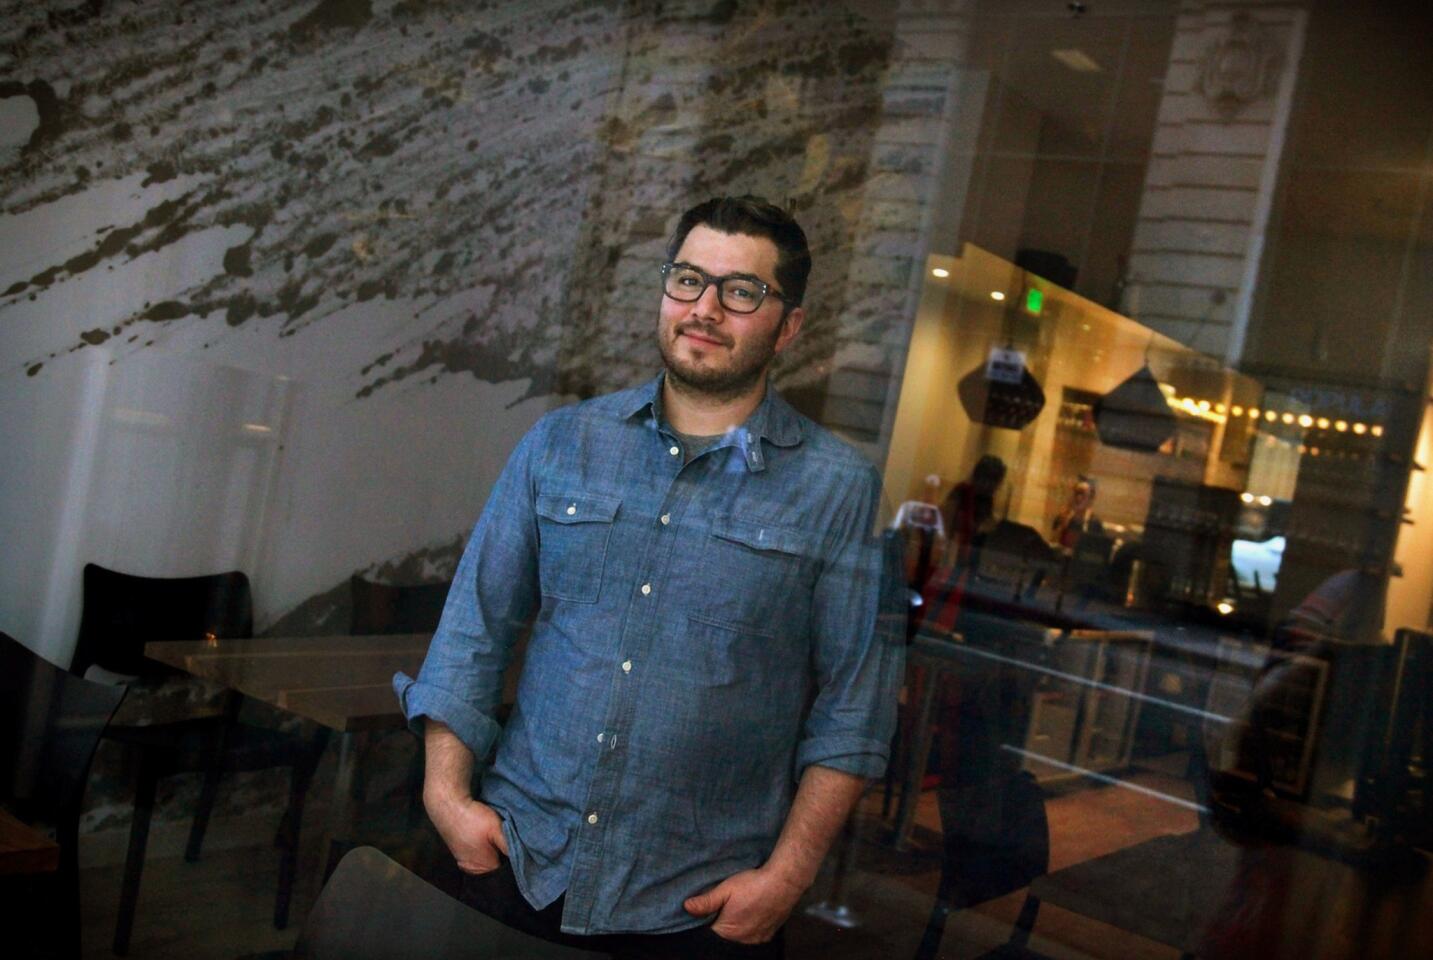 Chef Josef Centeno, owner of Baco Mercat, Bar Ama and Orsa & Winston in L.A., routinely works a 16-hour day.